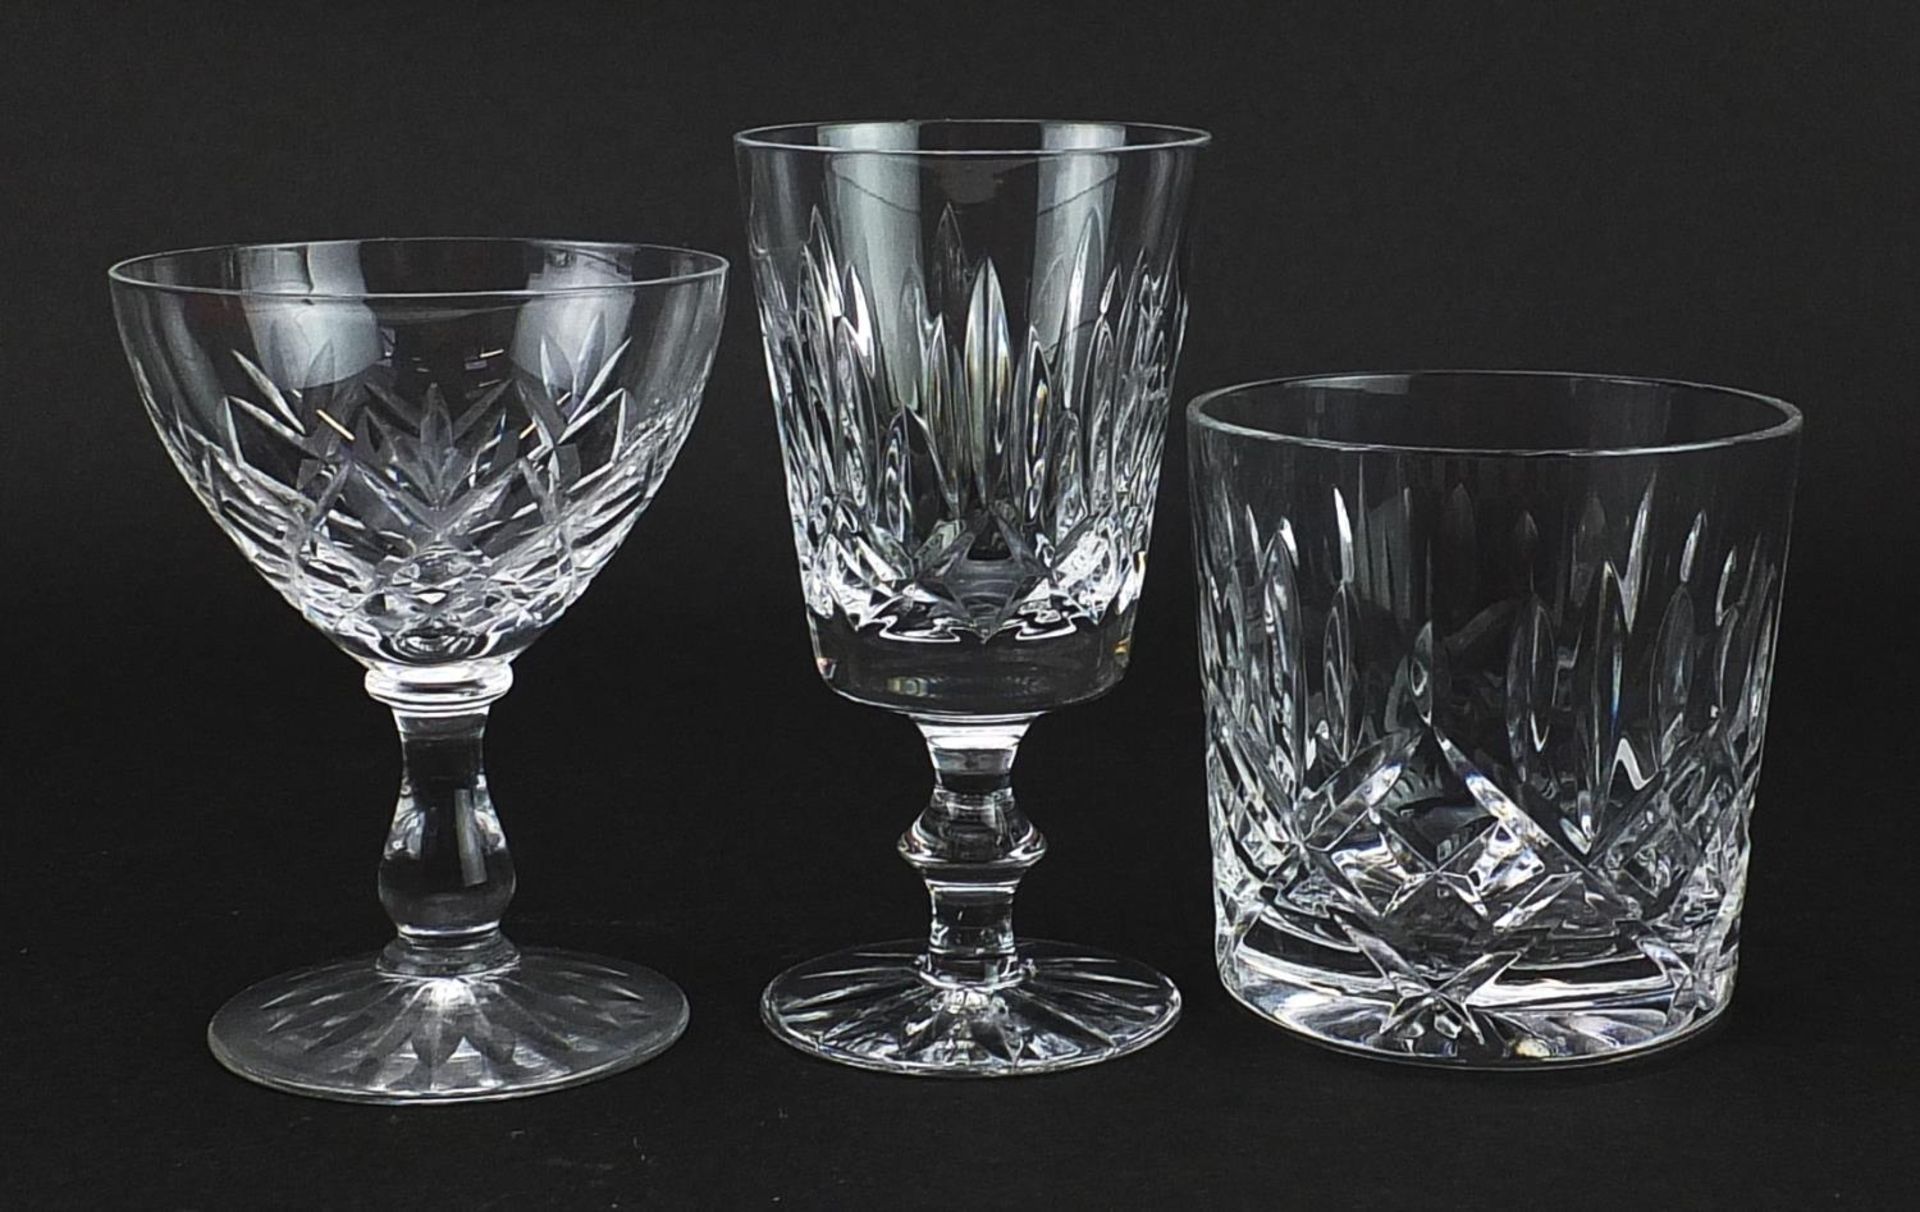 Royal Doulton crystal decanter and three sets of glasses, the decanter 23cm high - Image 4 of 4